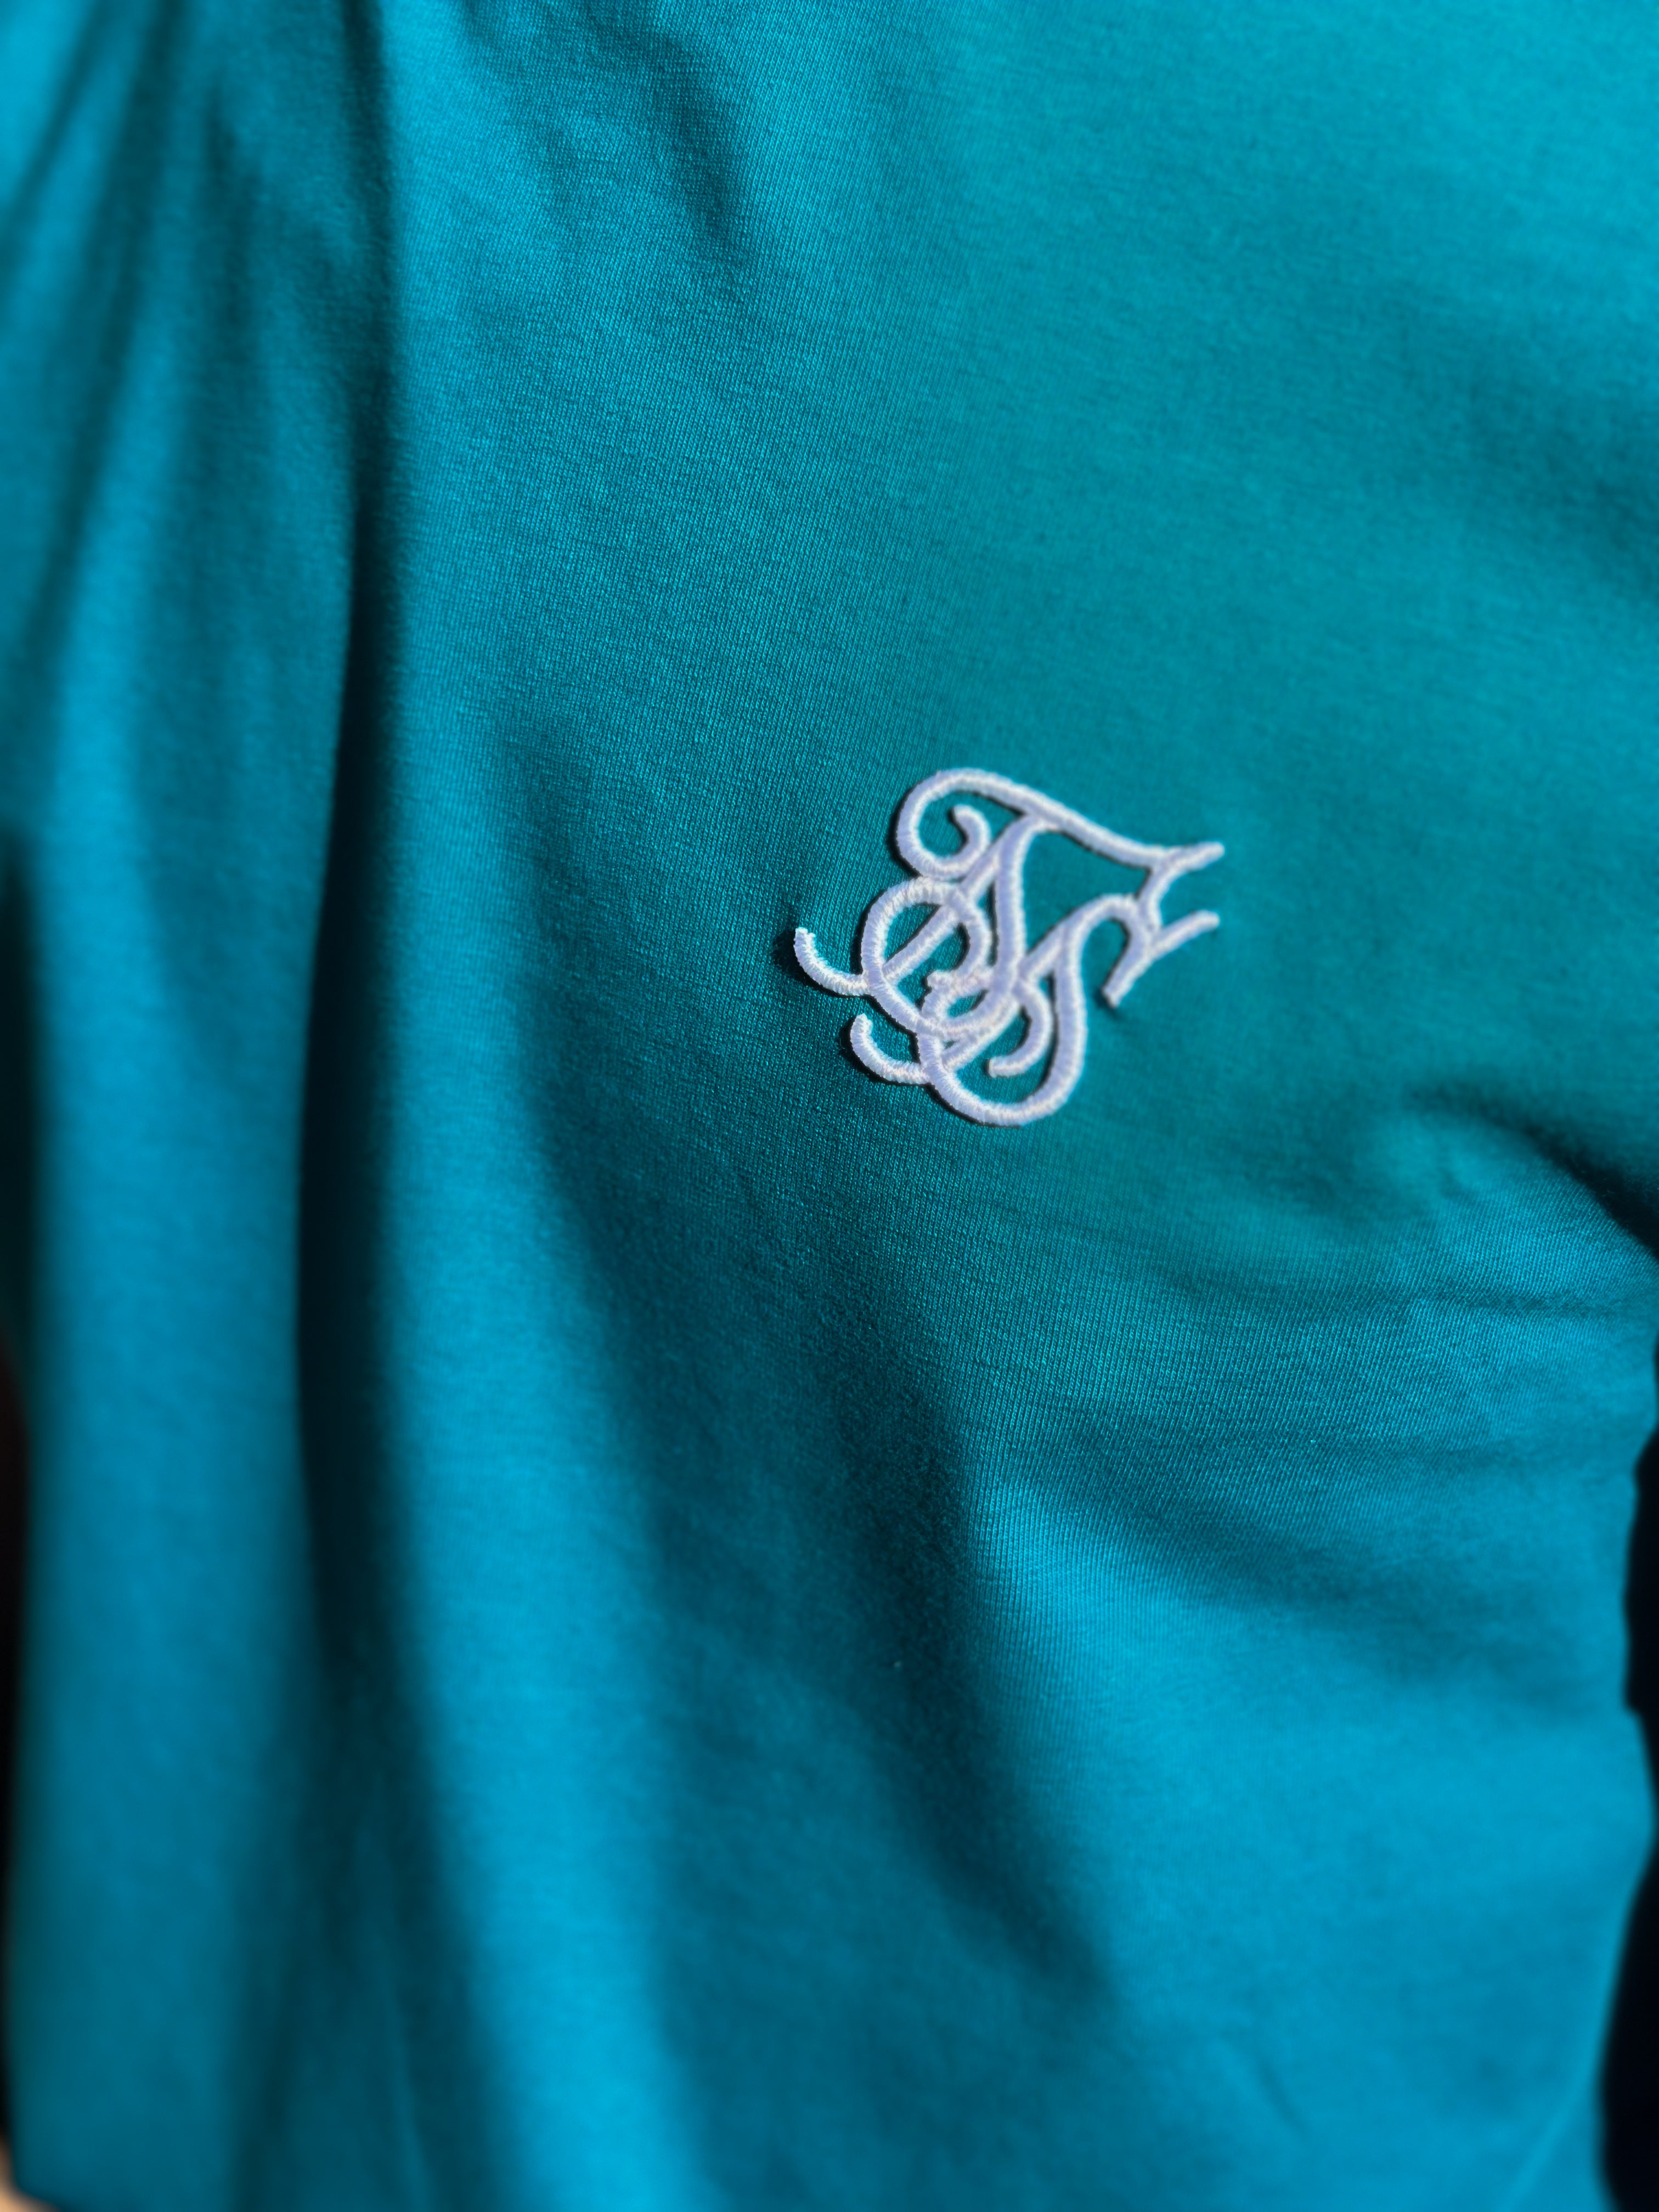 SikSilk - Muscle Fit T-Shirt Teal